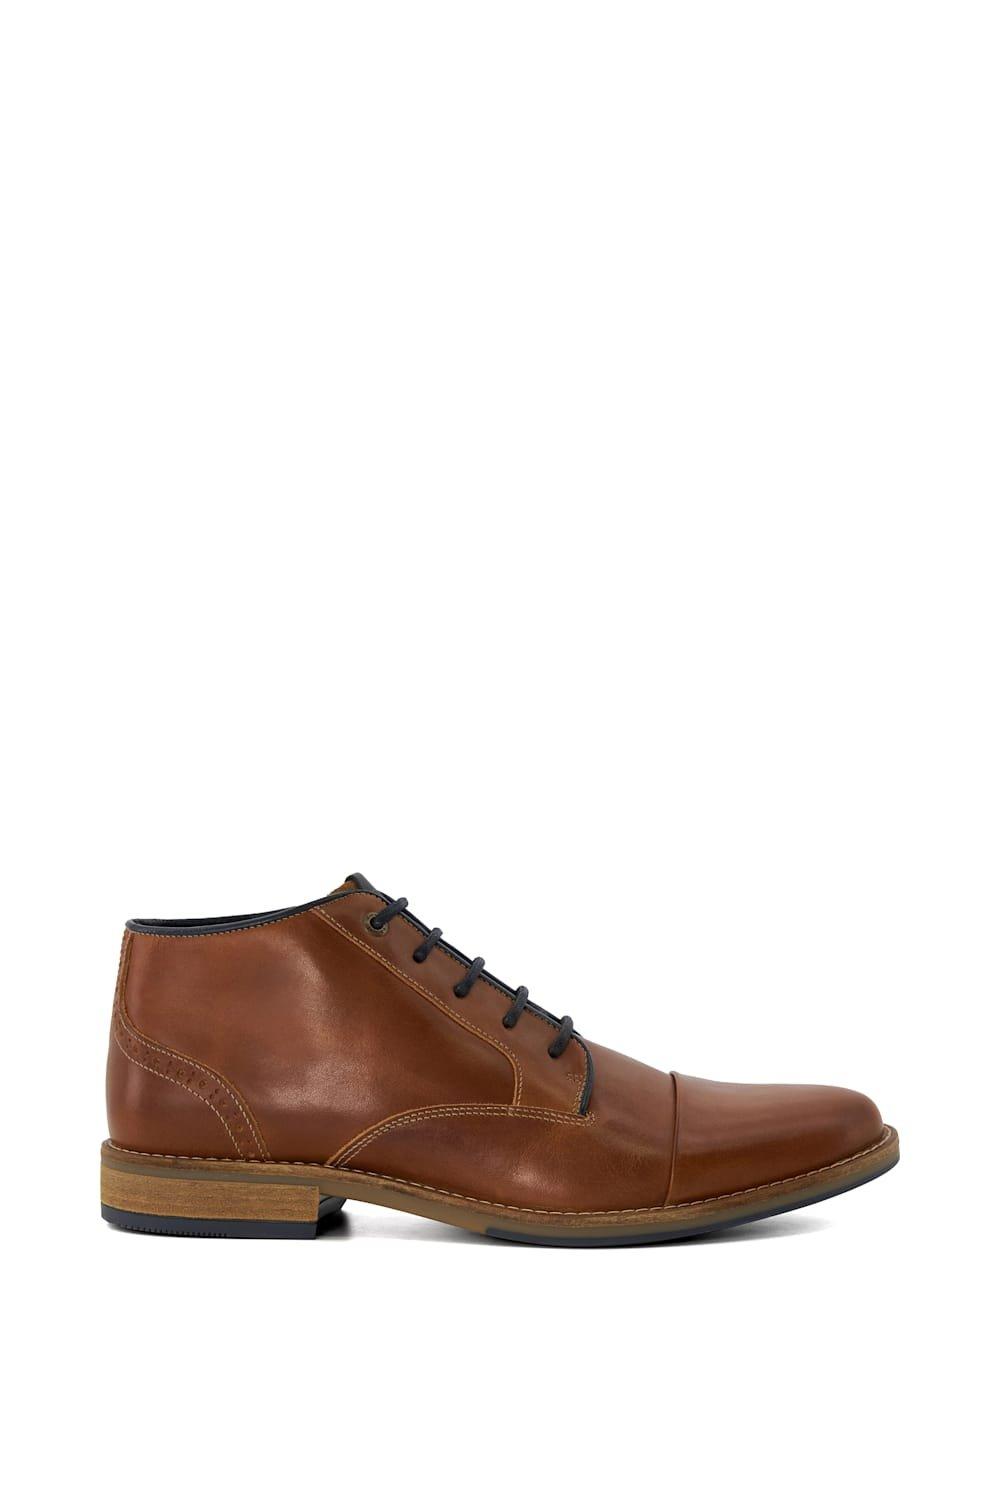 Boots | Wide Fit 'Carlings' Leather Casual Boots | Dune London